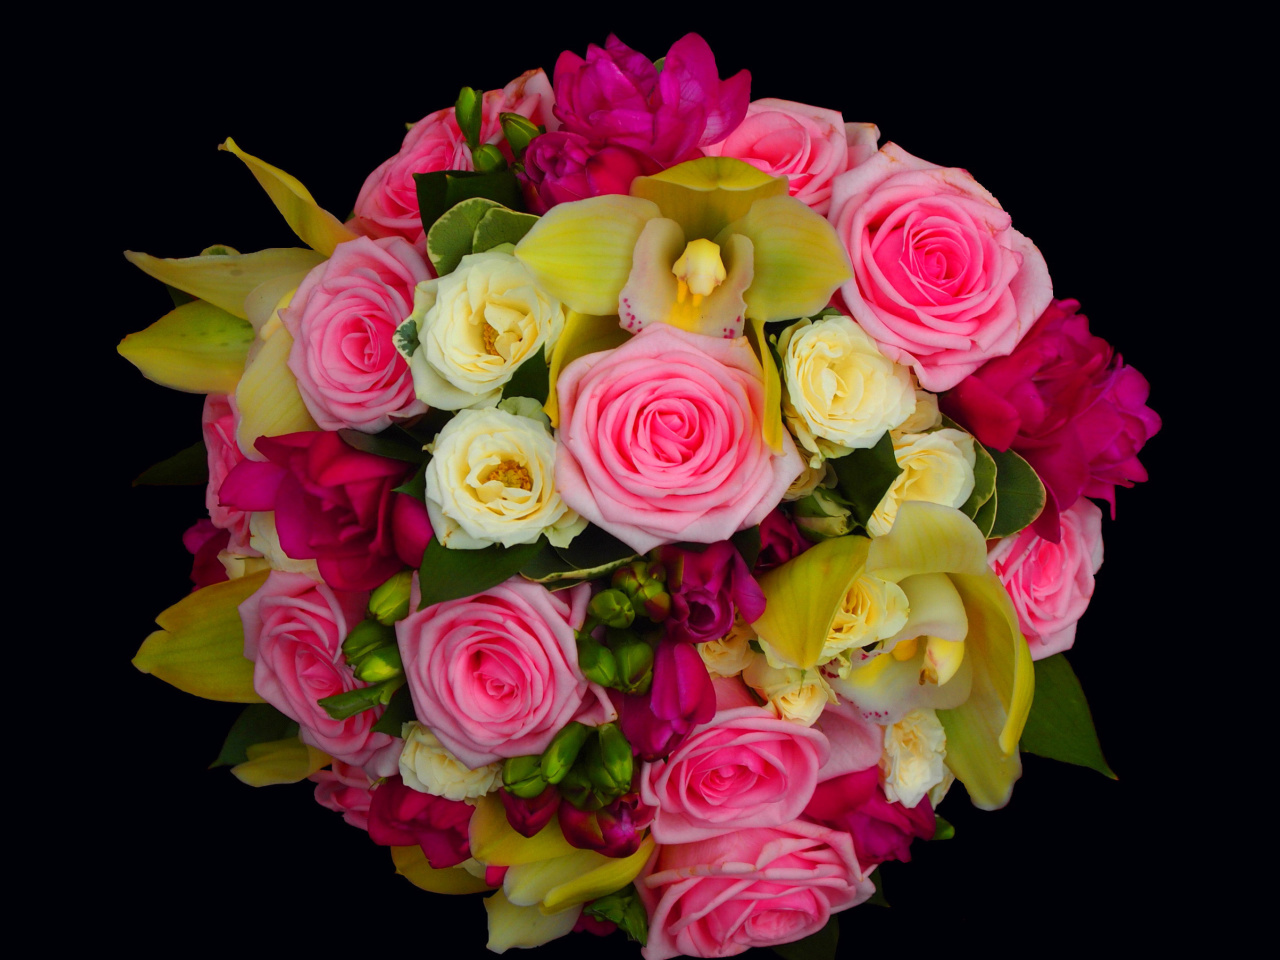 Das Bouquet of roses and yellow orchid, floristry Wallpaper 1280x960